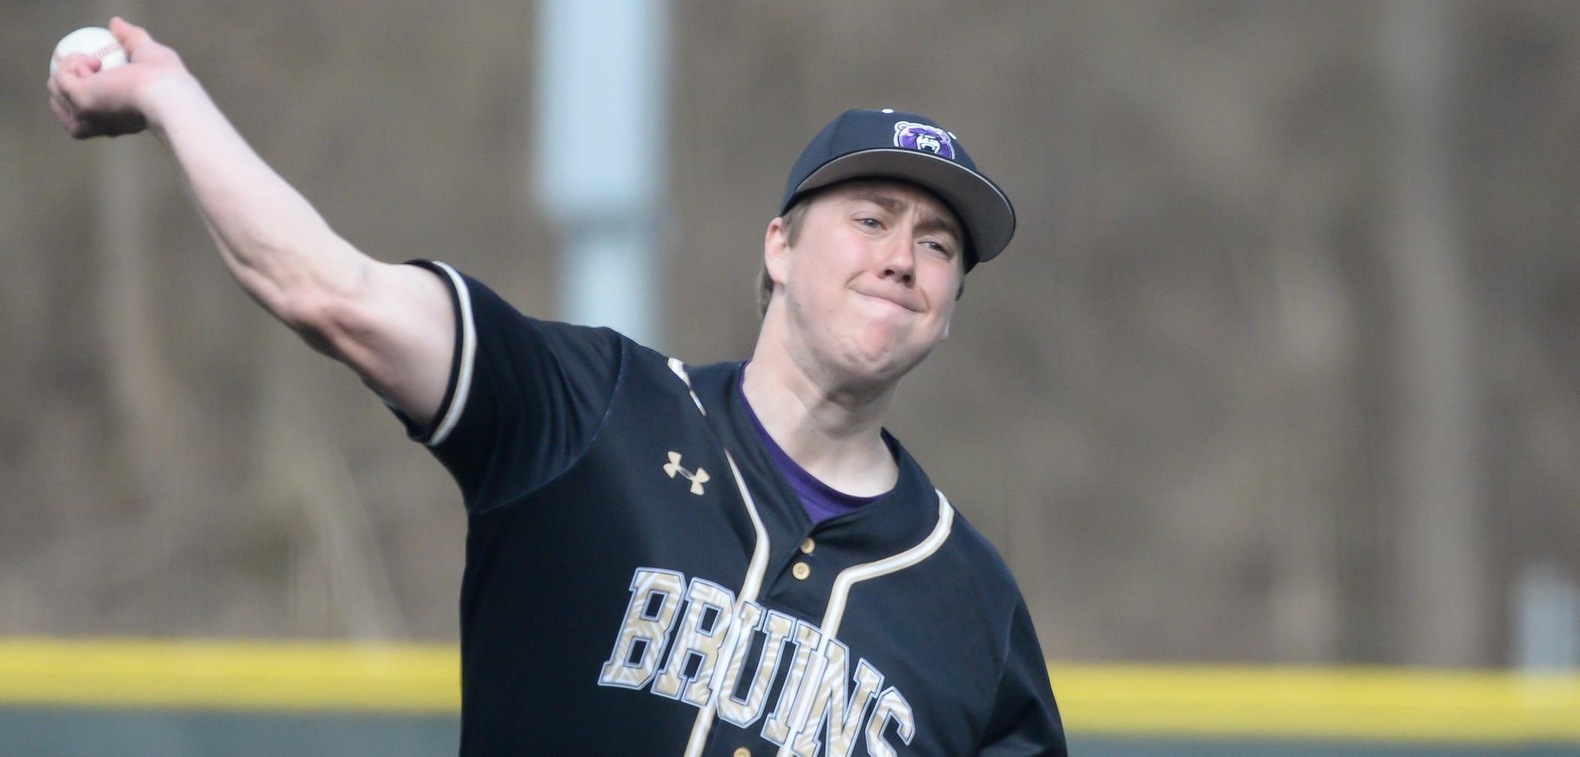 McGrane Pledger struck out a season-high 13 batters on a day where BU pitching totaled 35 K's in a double-header sweep.